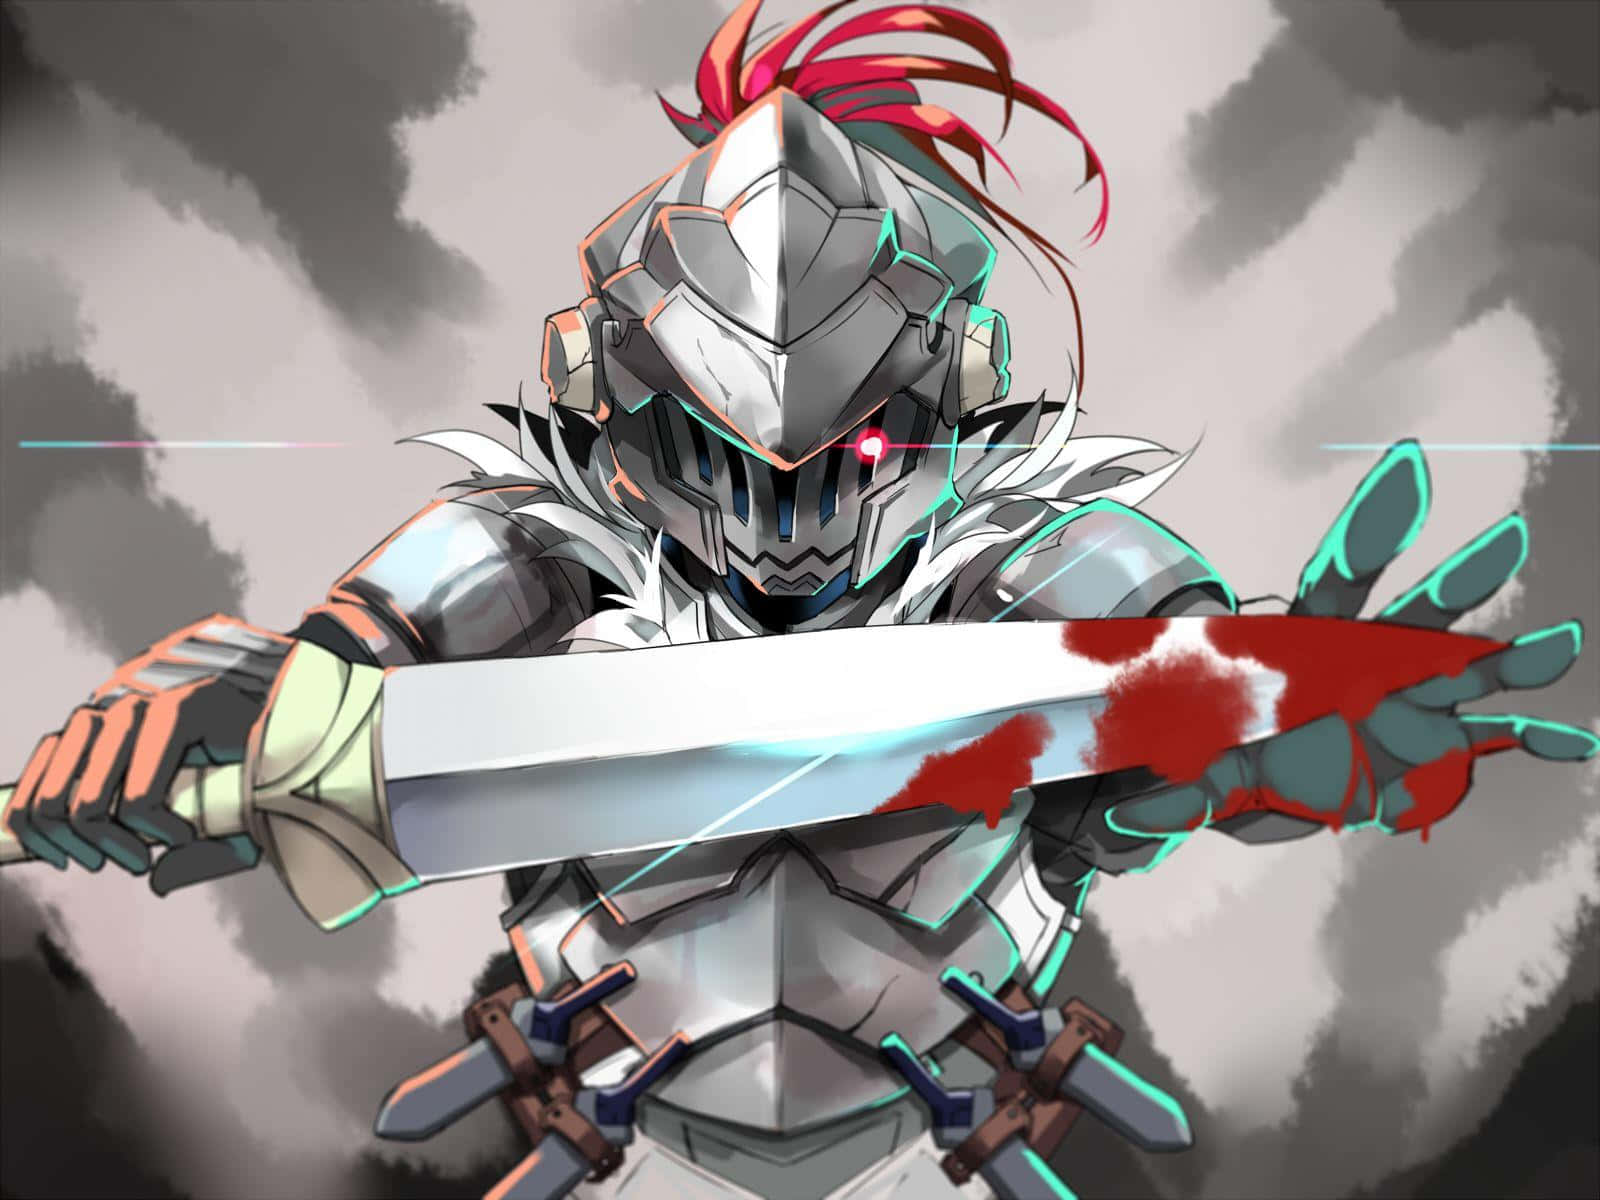 Goblin Slayer ready for battle in a menacing pose